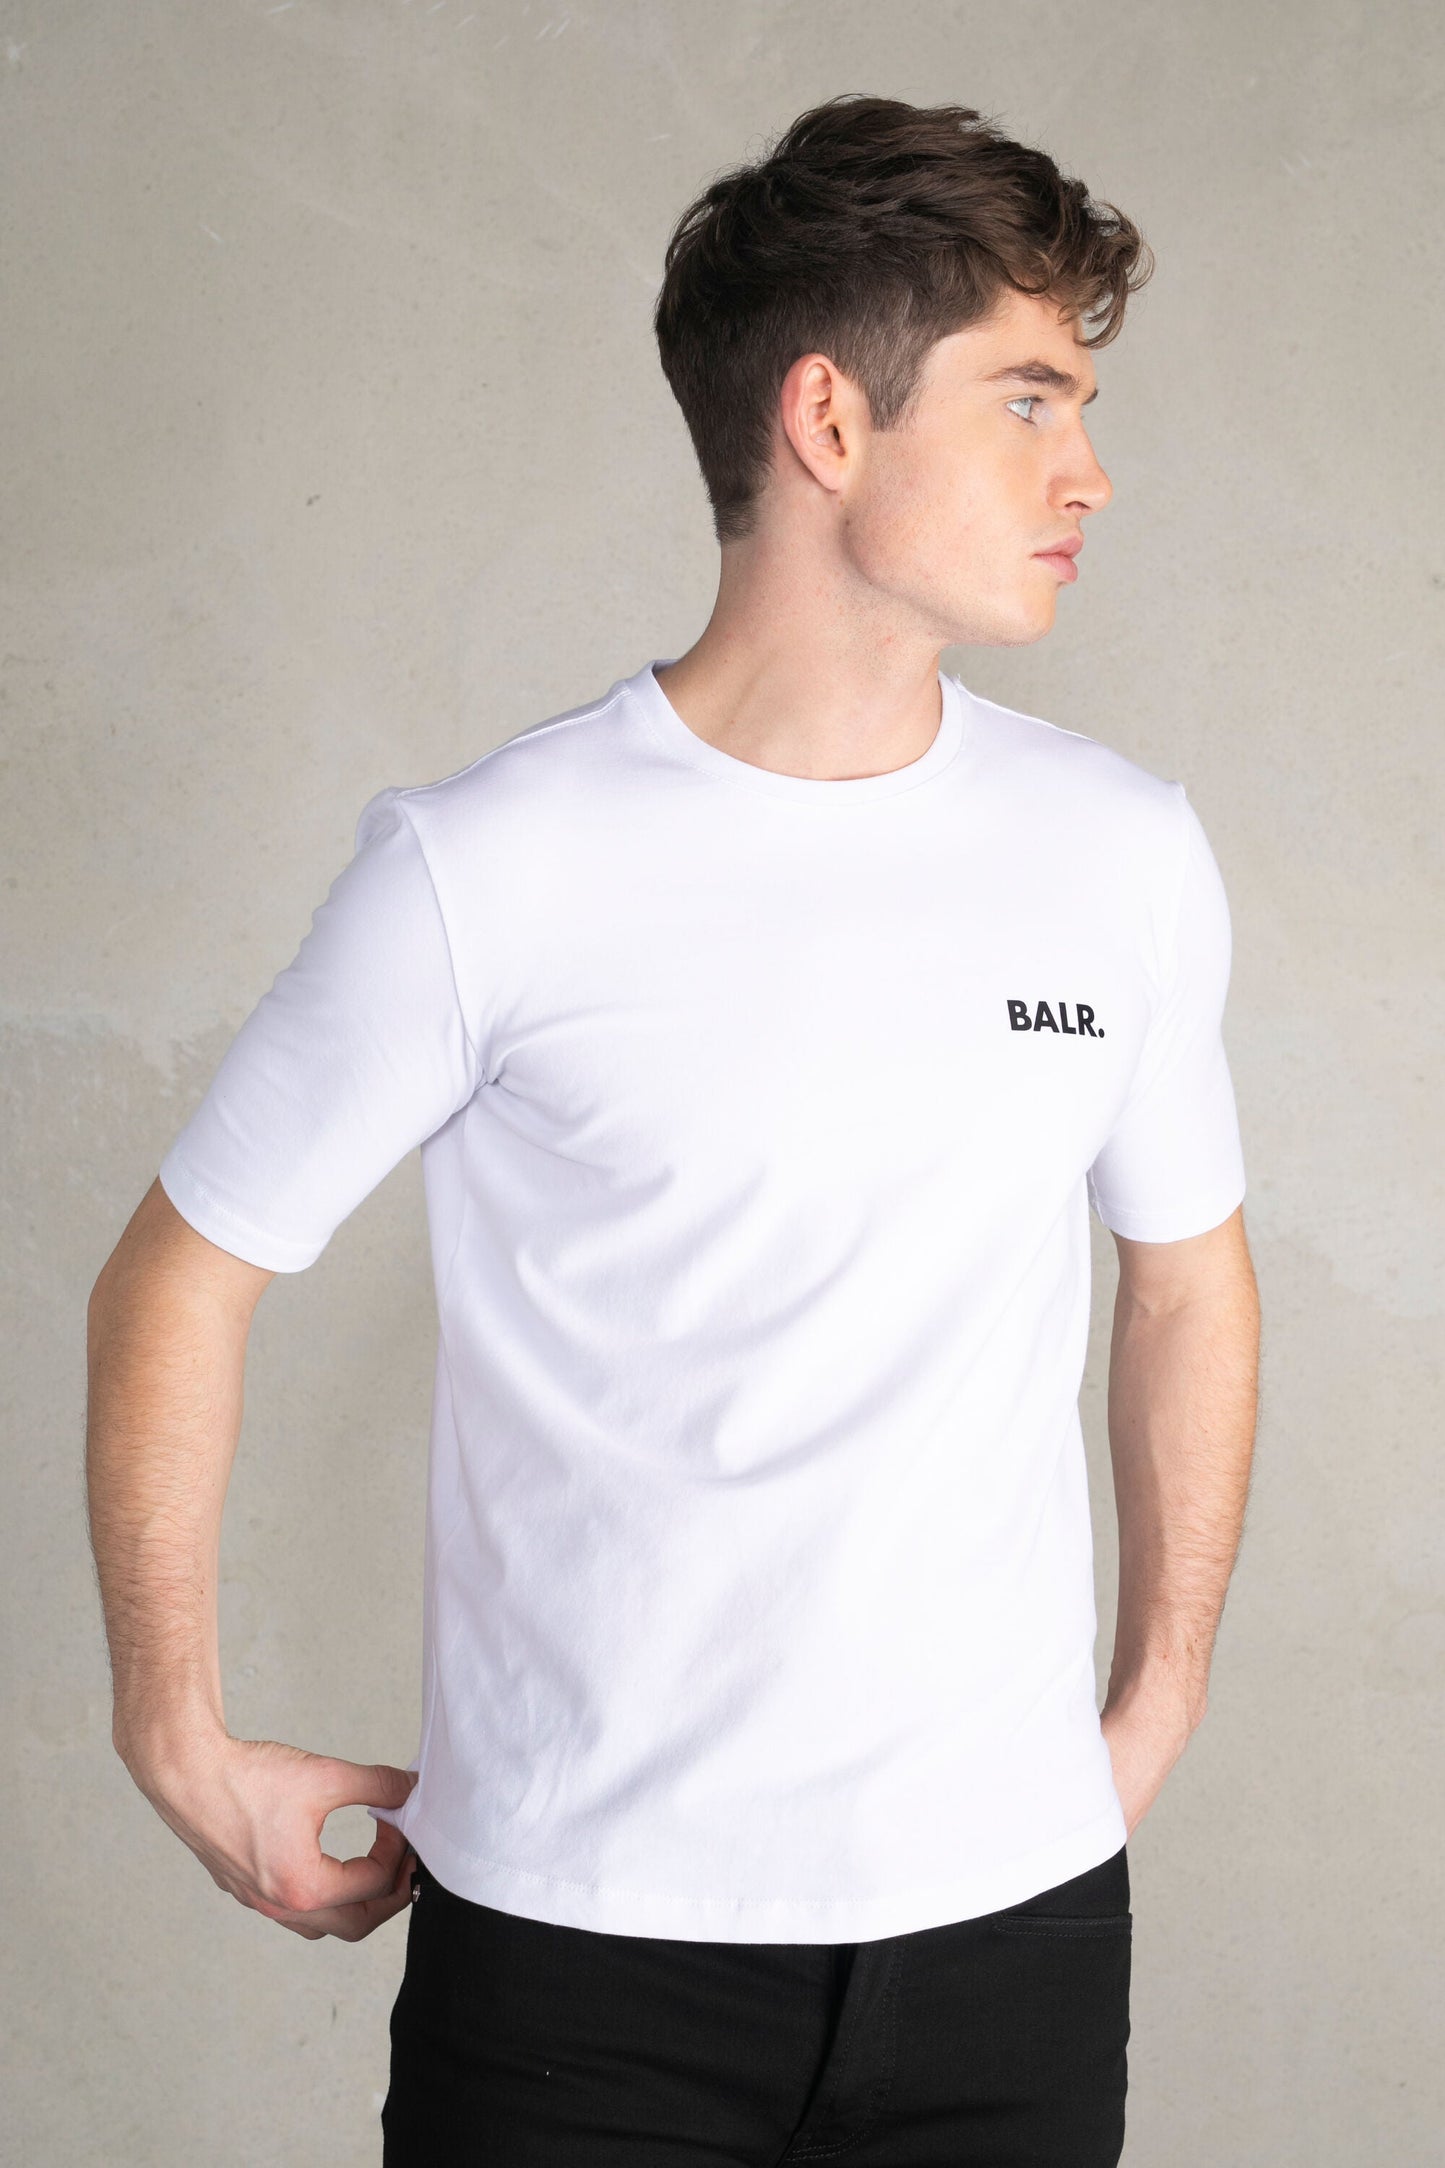 ATHLETIC SMALL BRANDED CHEST T SHIRT BRIGHT WHITE